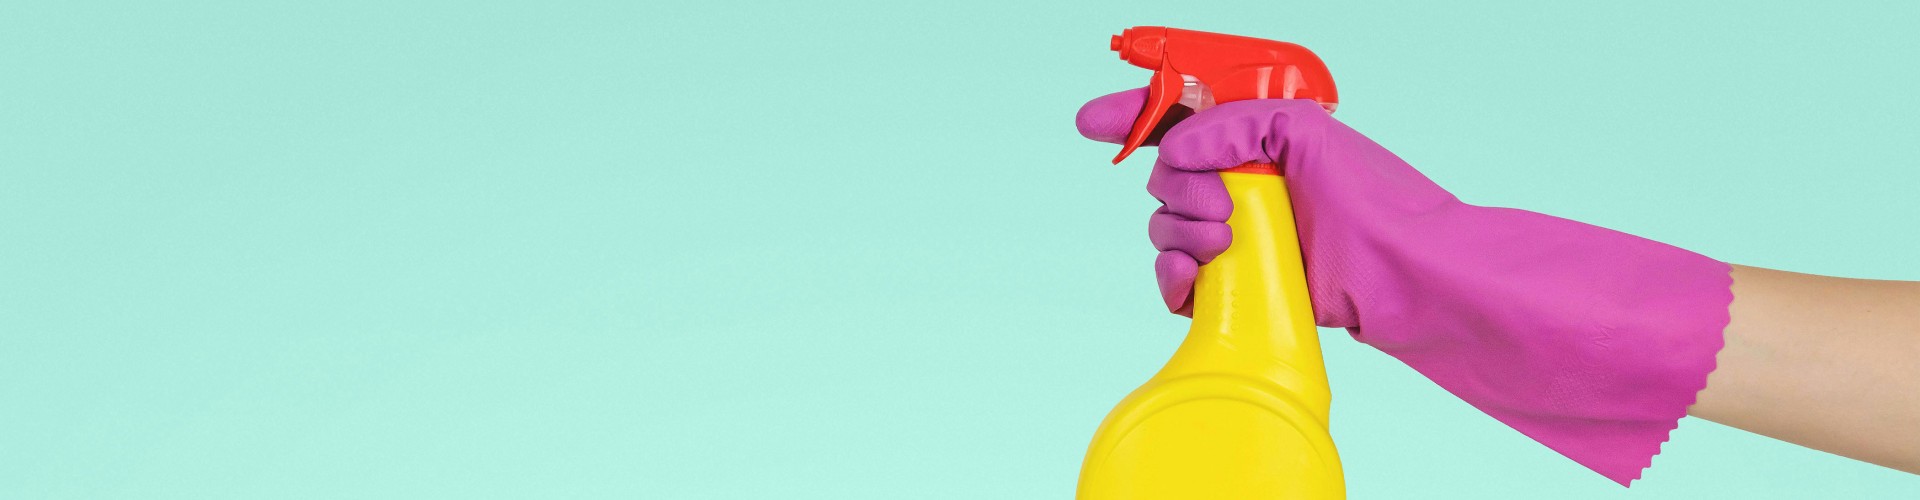 A pink rubber gloved hand and some yellow cleaning spray